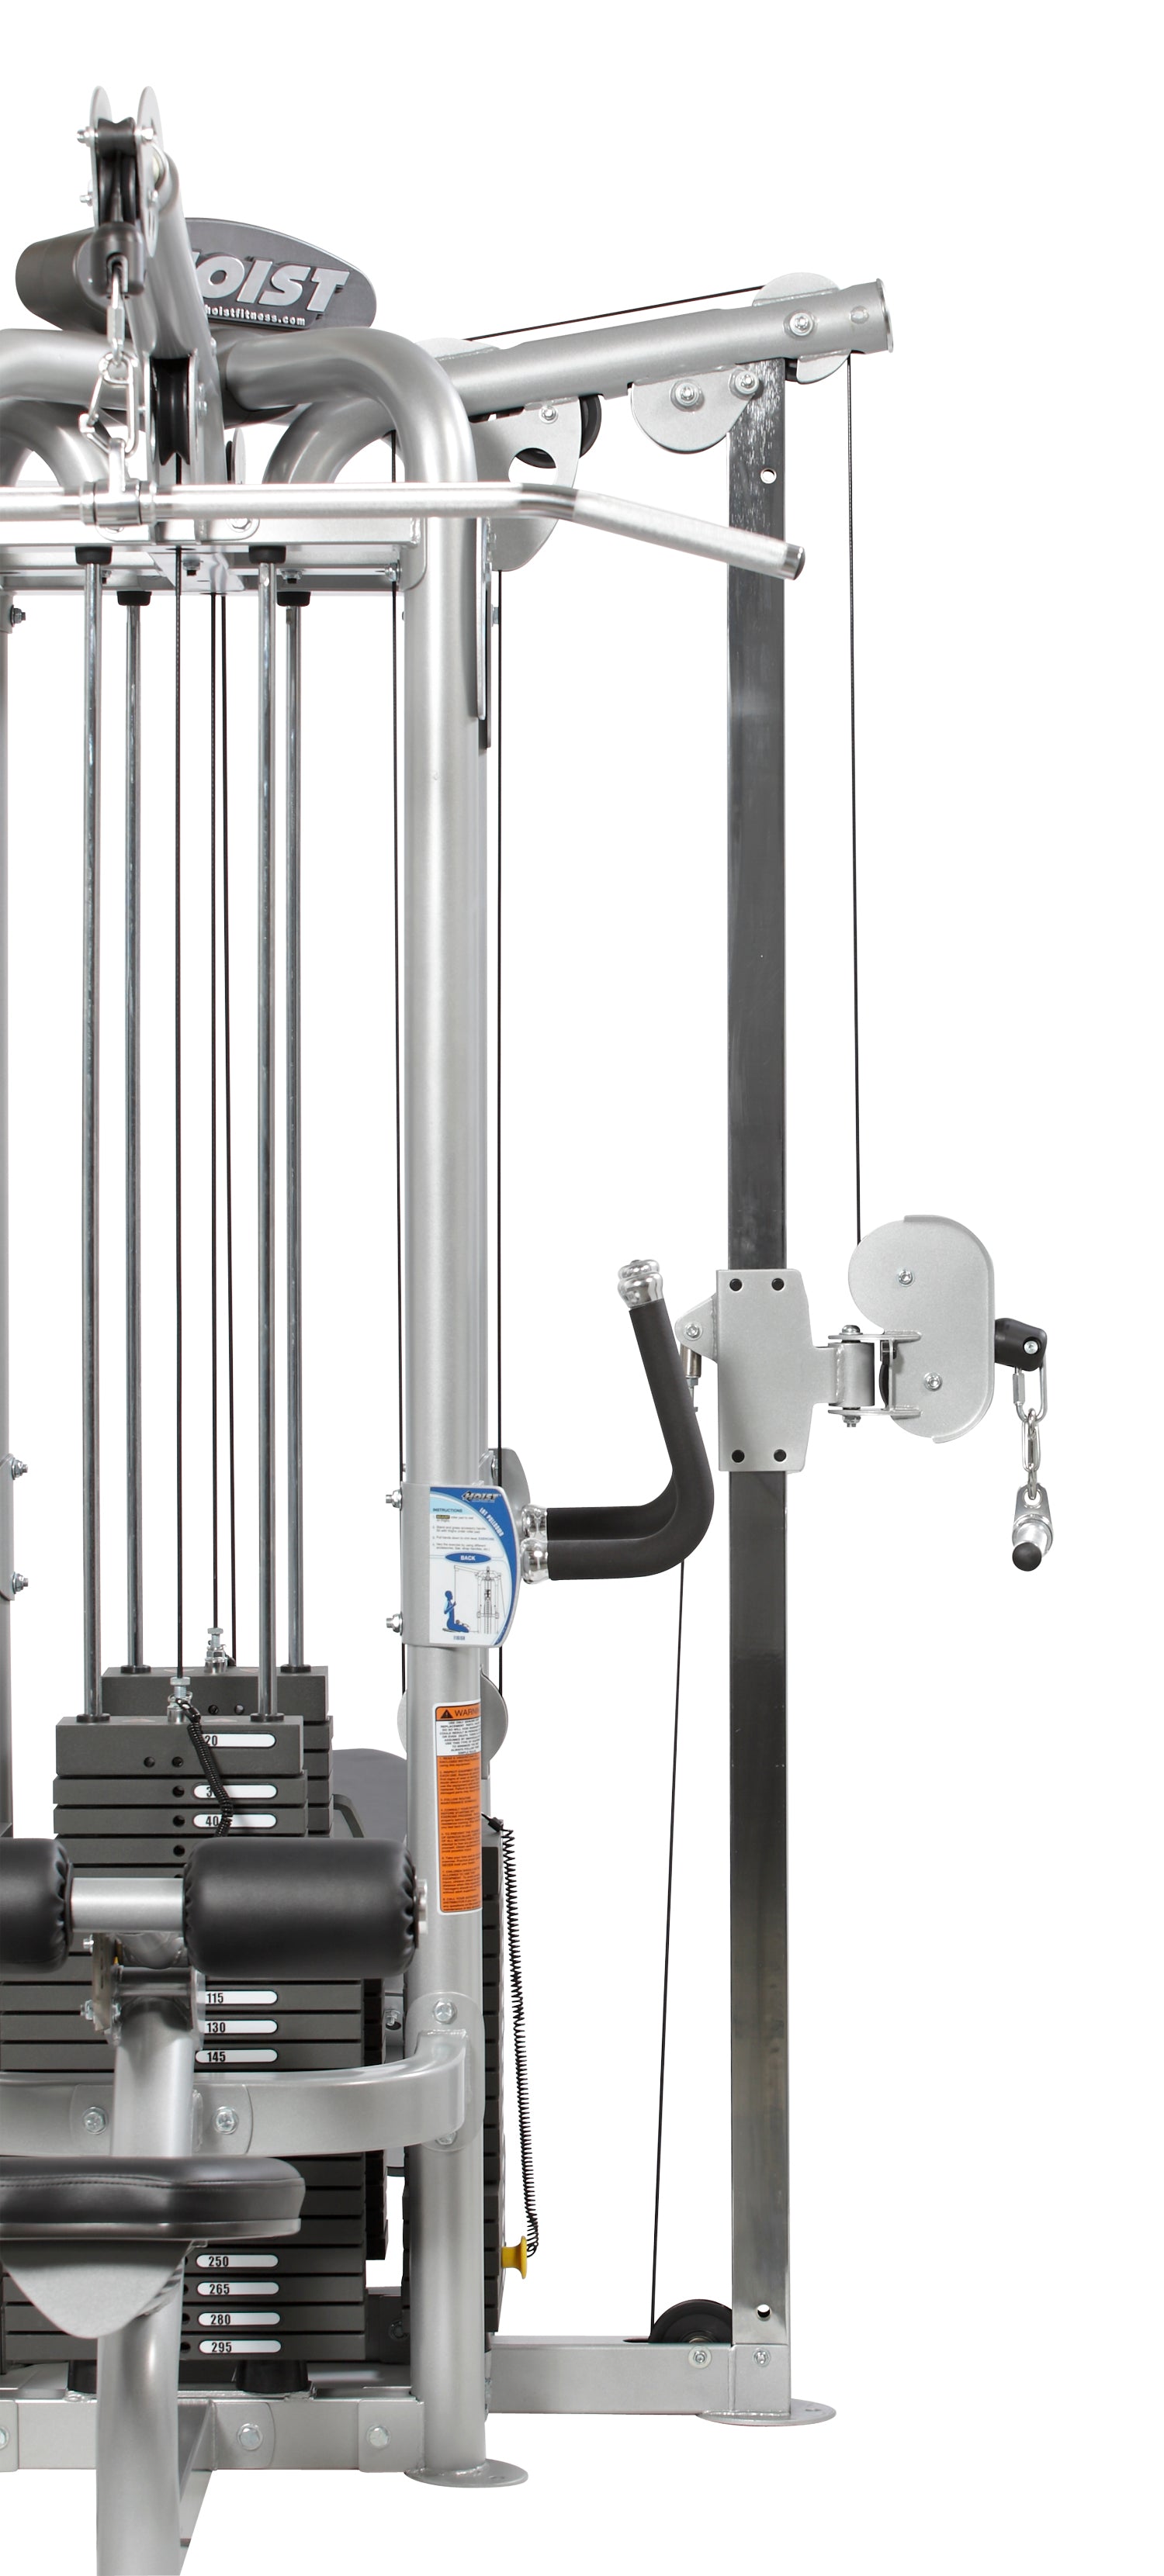 Commercial Multi-Station Gym Equipment